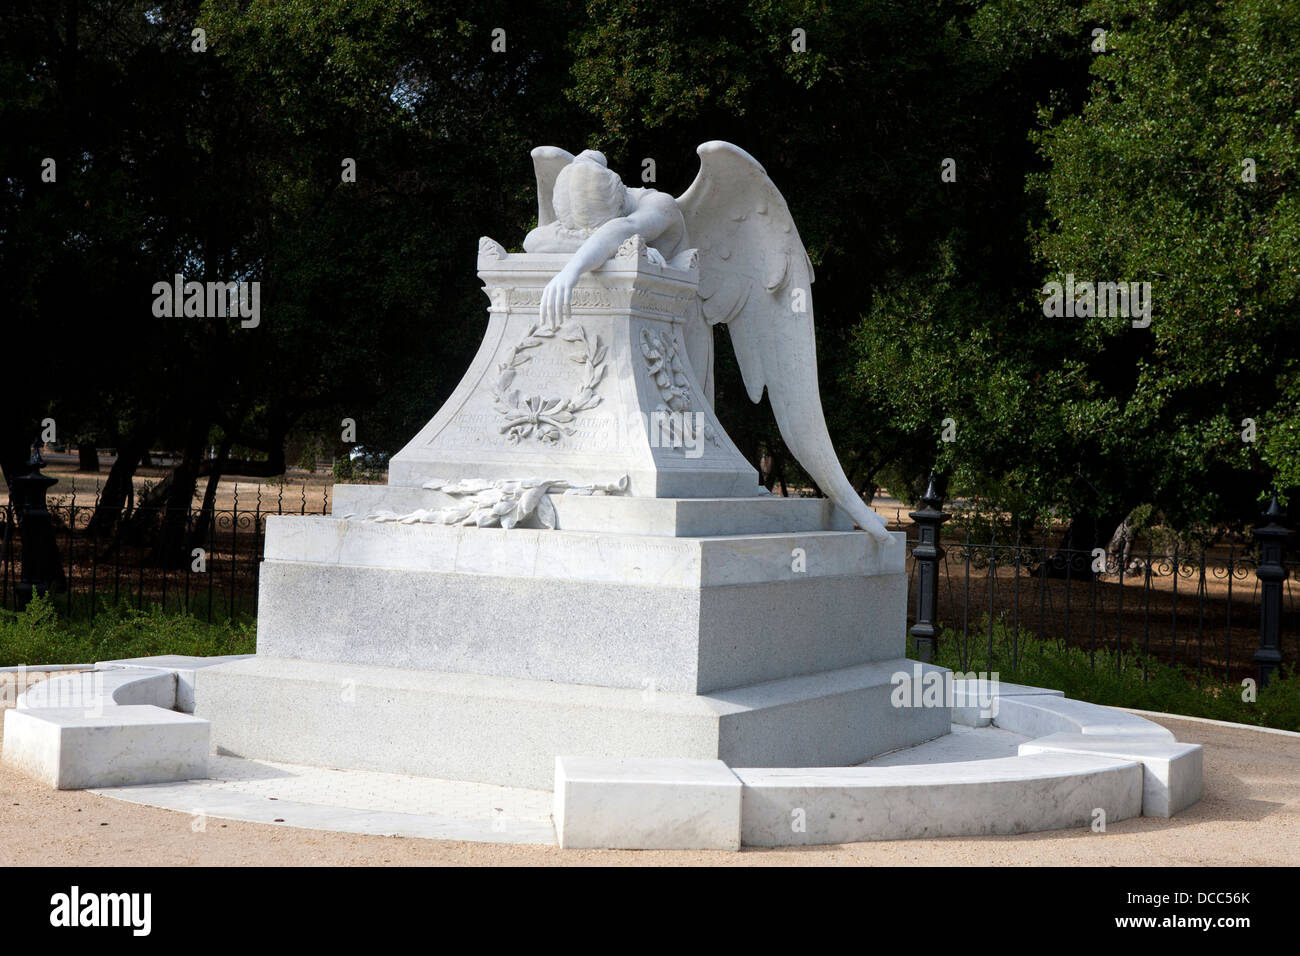 Angel of Grief statue, Stanford, California, United States of America Stock Photo